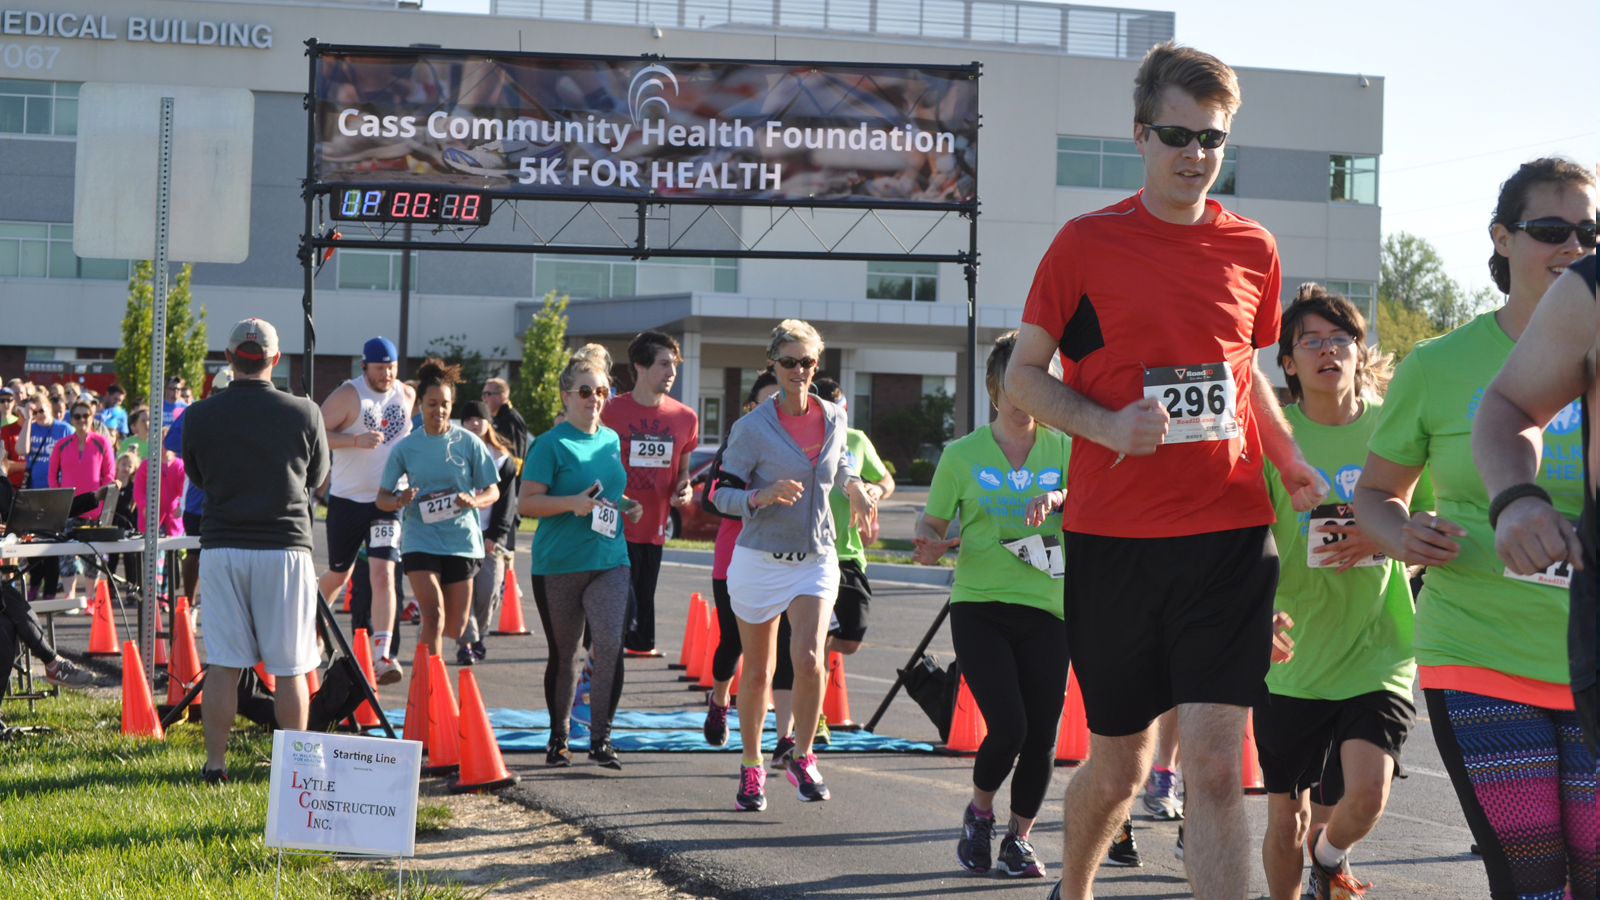 27th Annual 5K for Health encourages help with fundraising goal